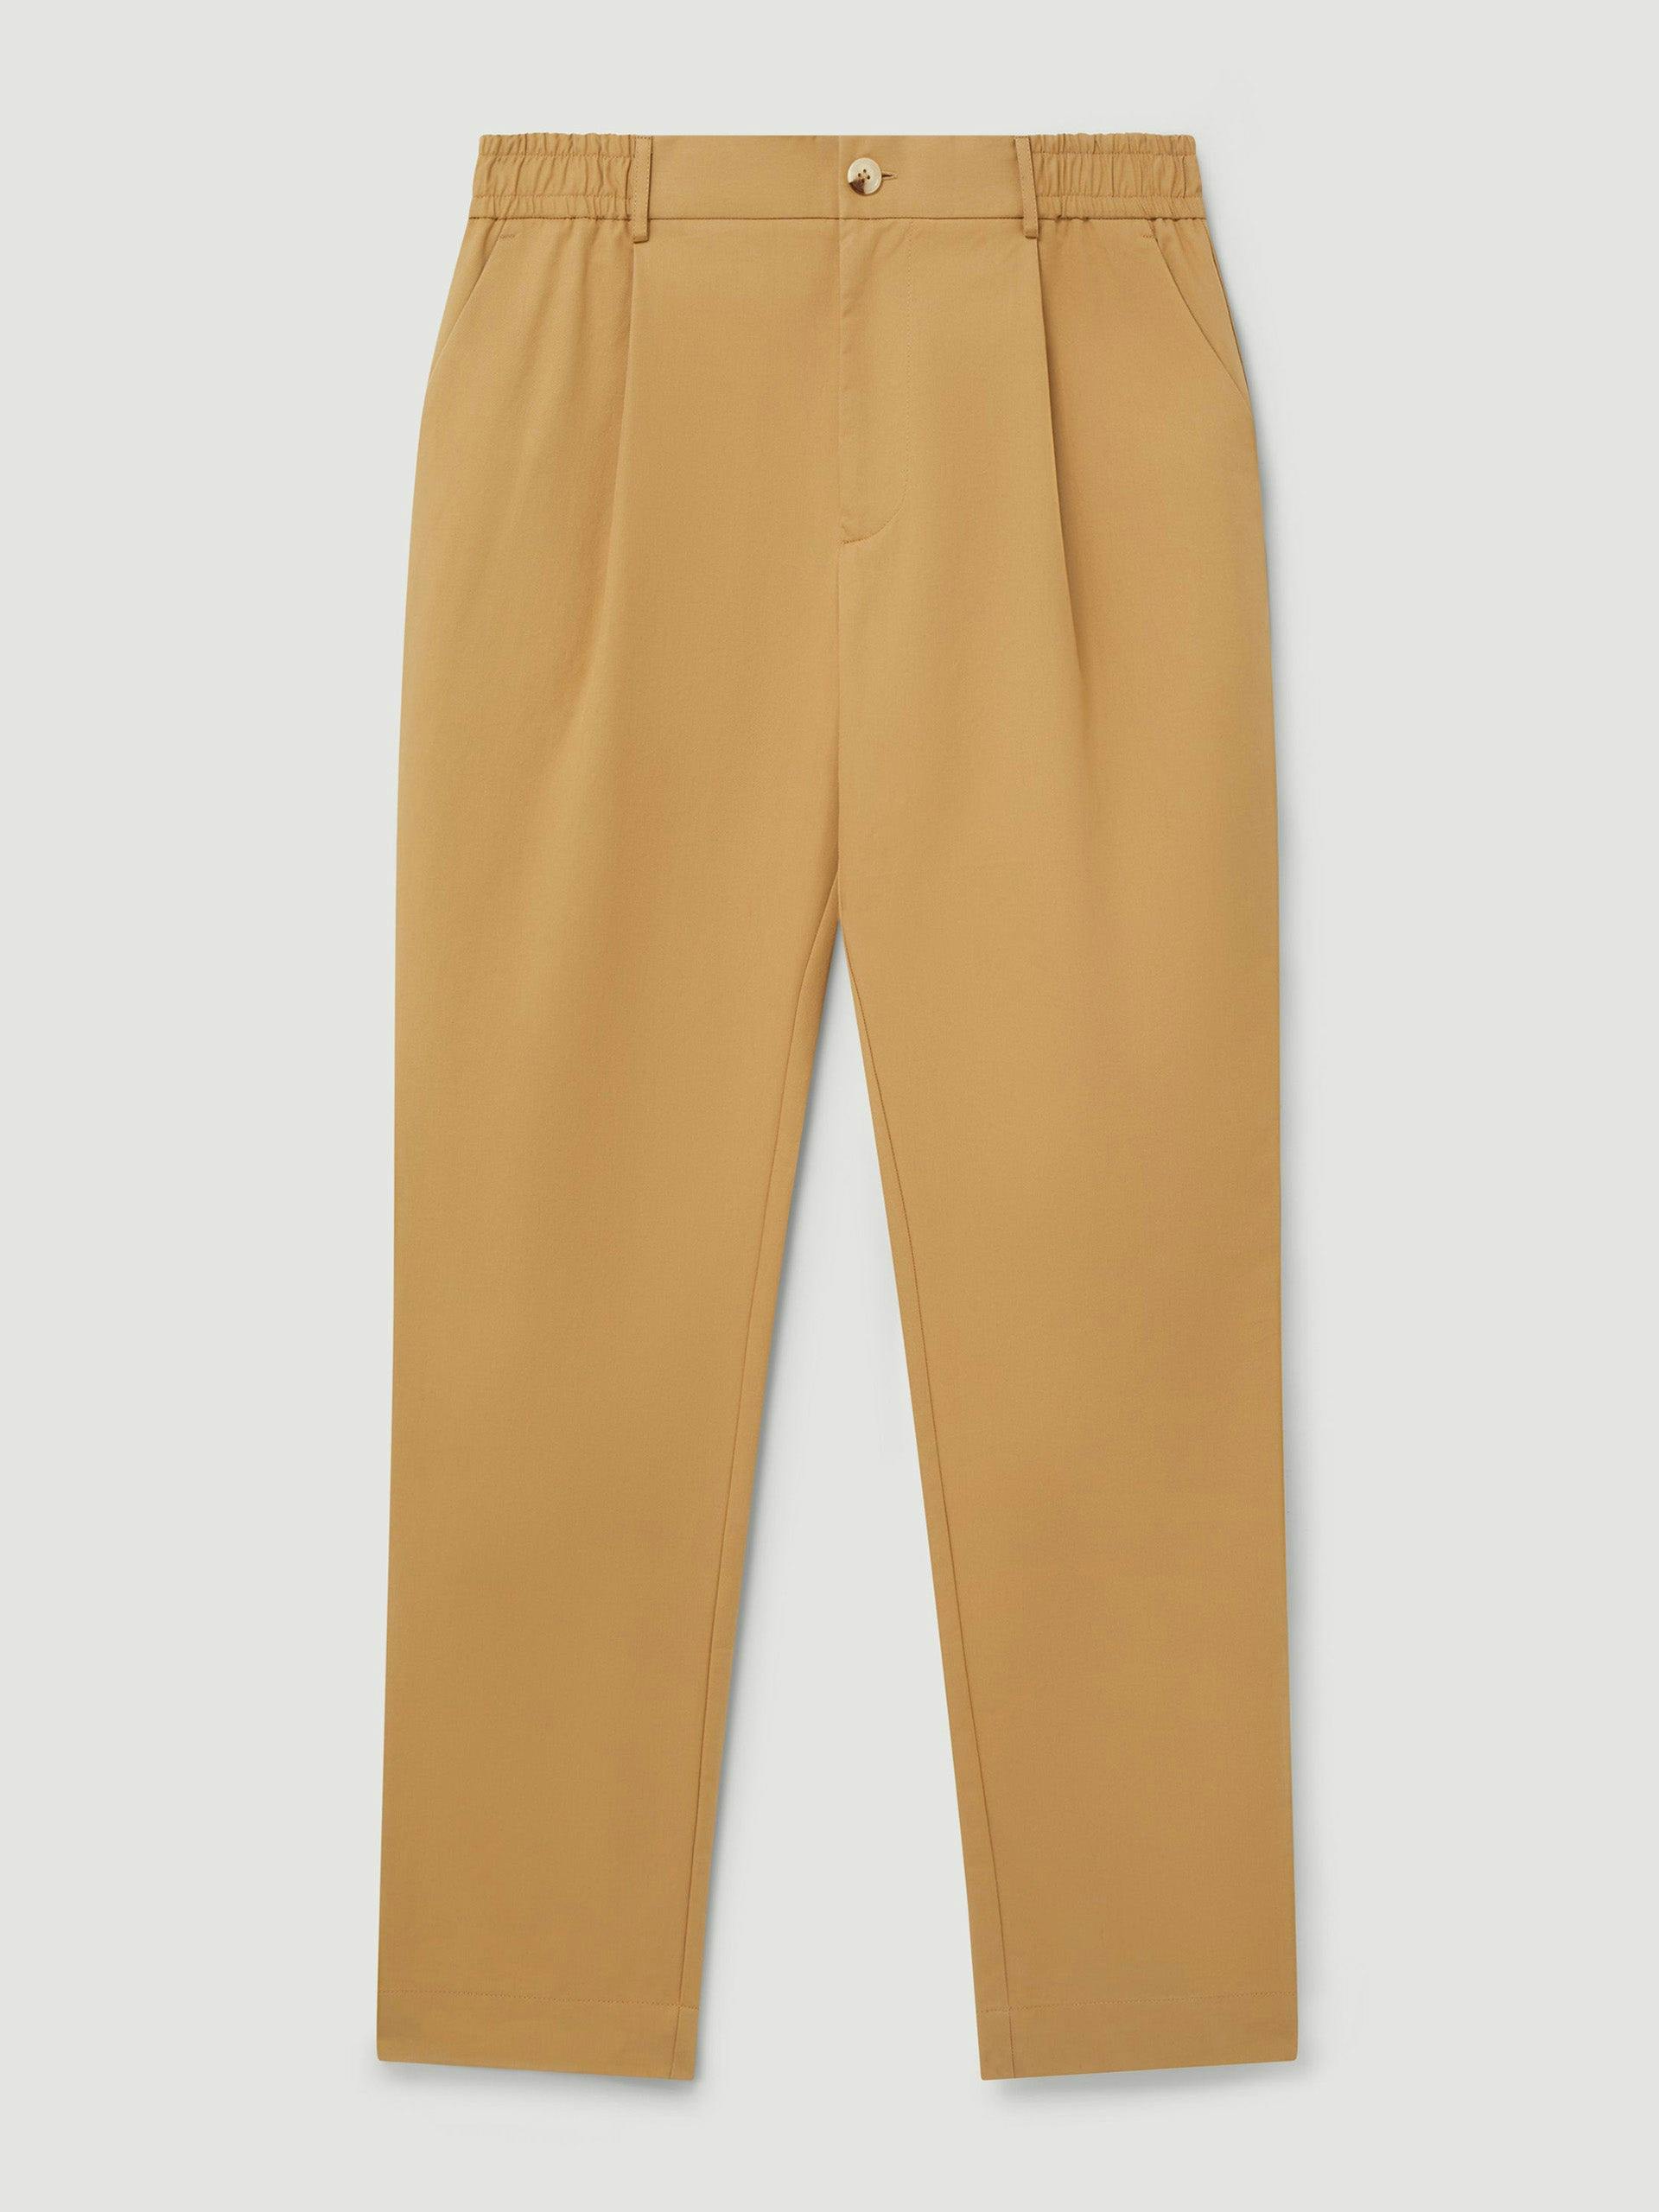 Tan pleated chino trousers